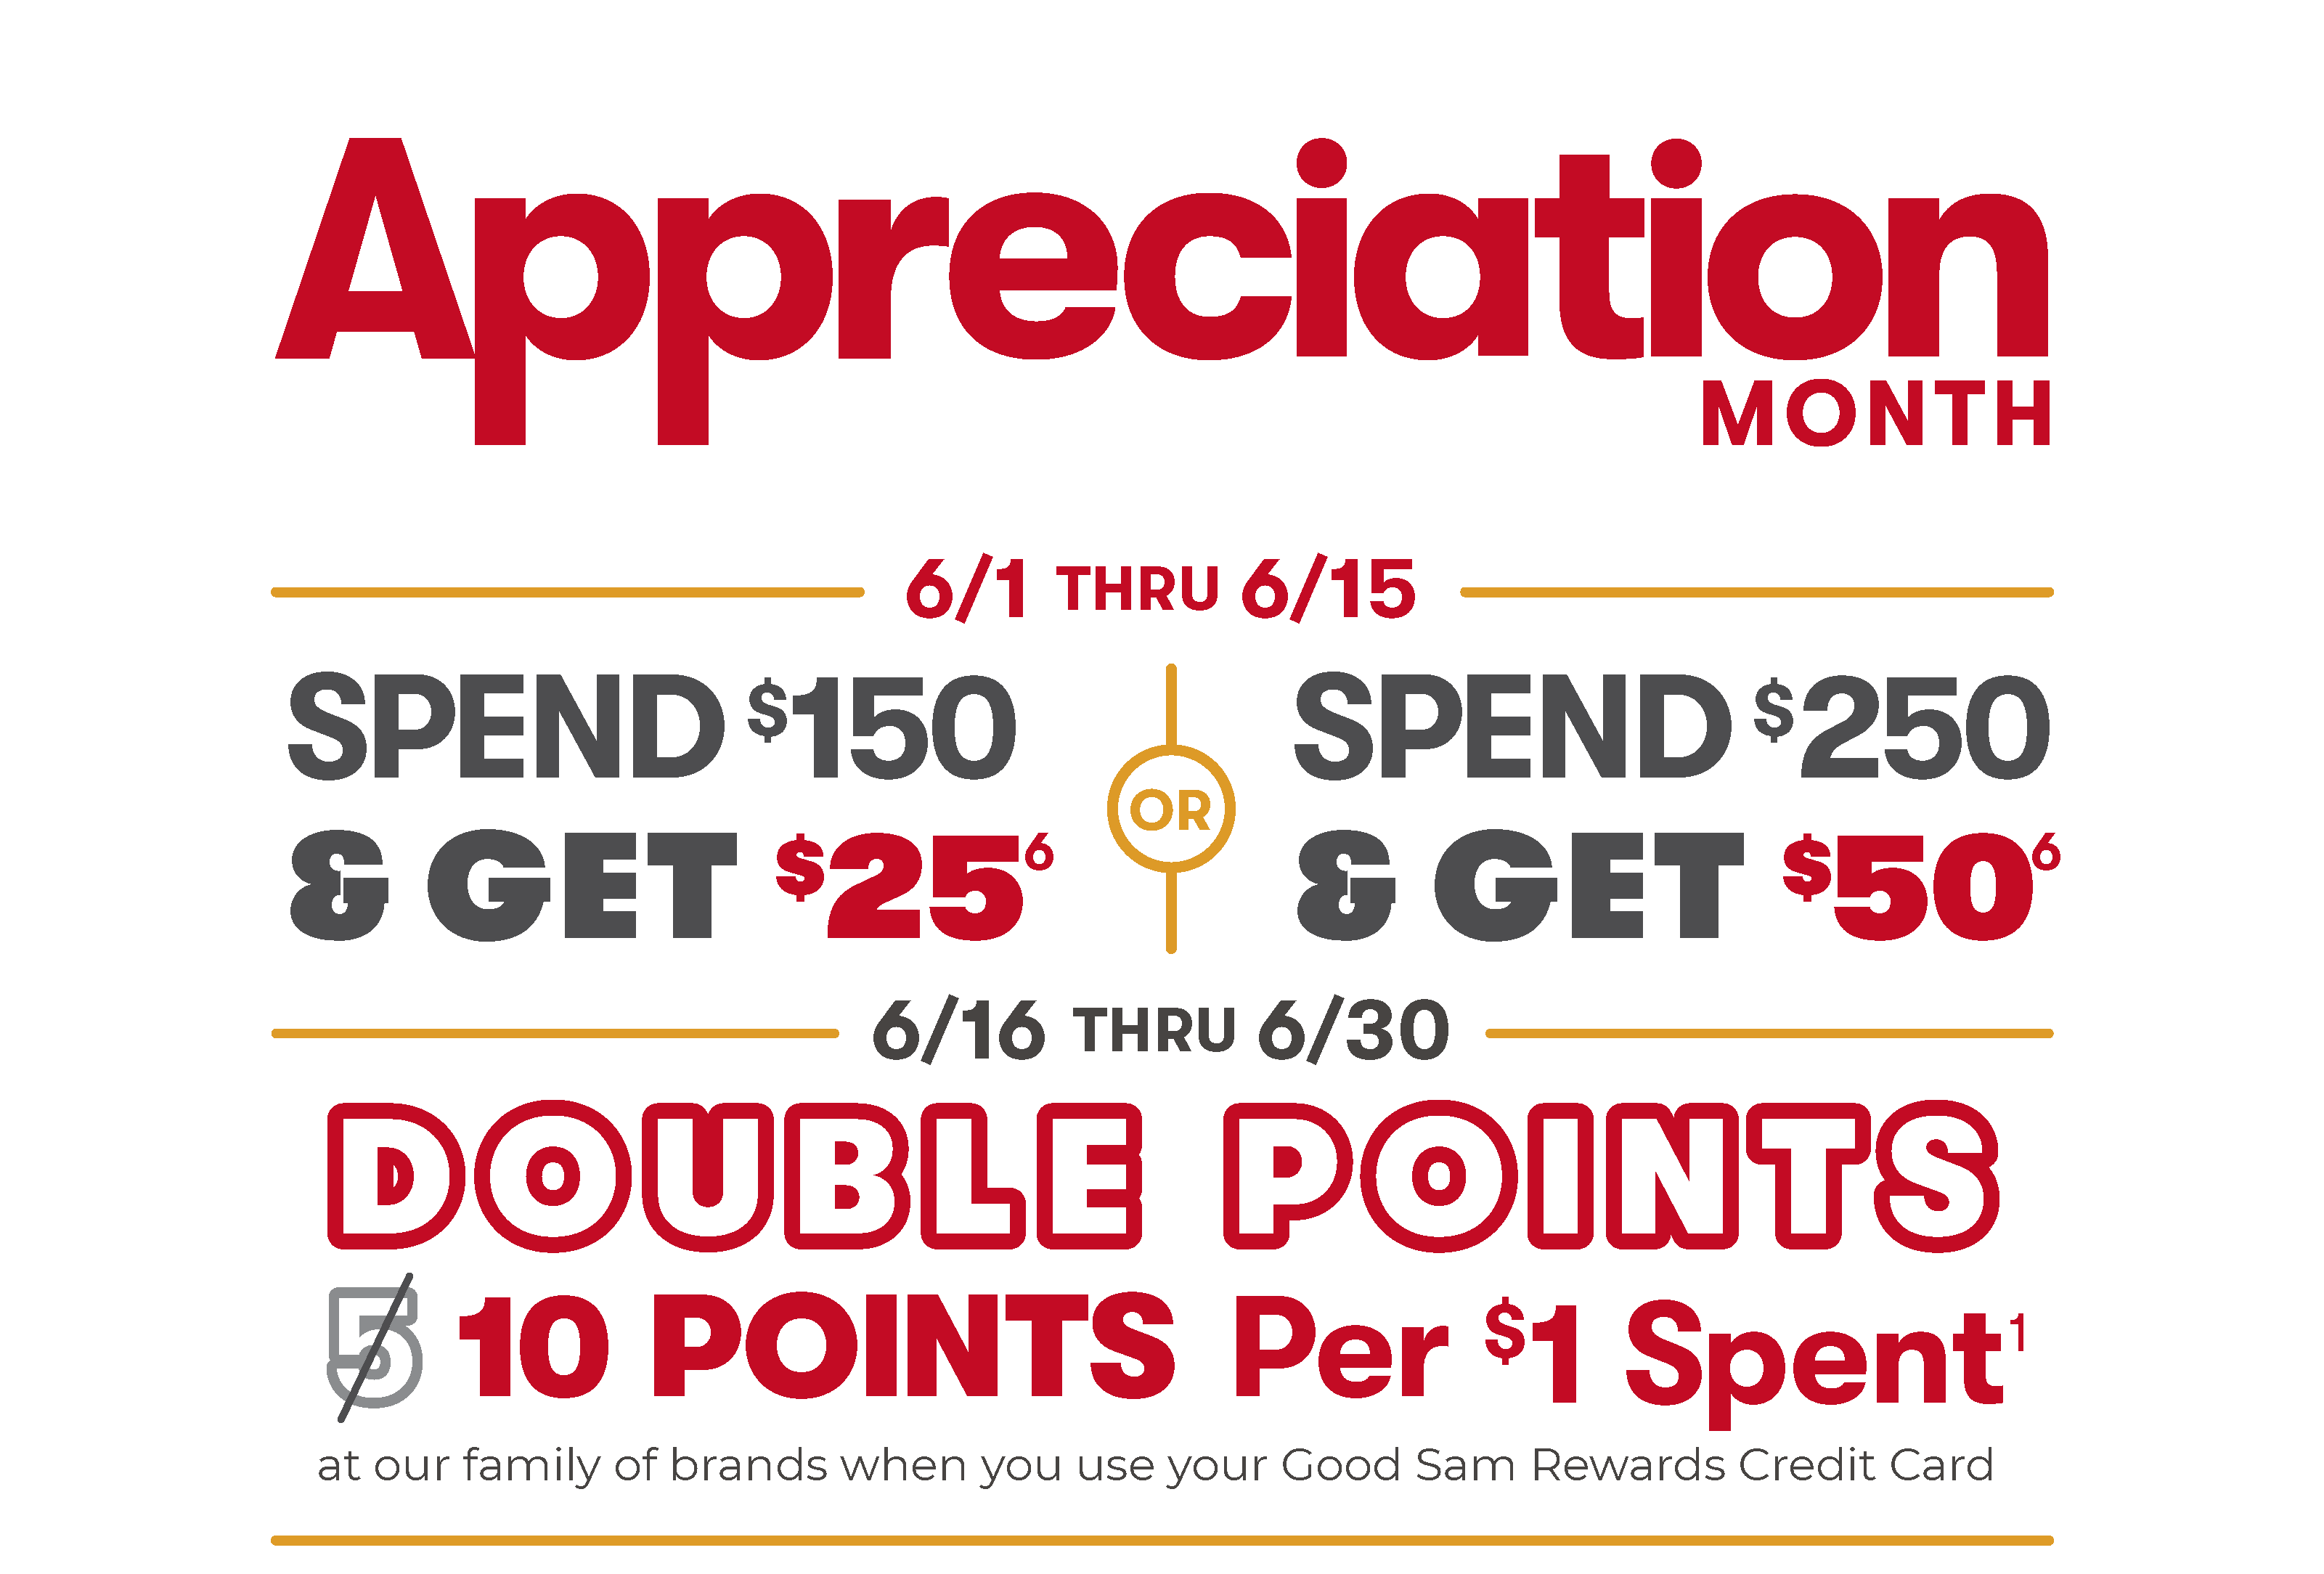 Appreciation Month. June 1st thru June 15th spend $150 & get $25⁶ OR spend $250 & get $50⁶. June 16th thru June 30th double points. 10 points per $1 spent¹ at our family of brands when you use your Good Sam Rewards Credit Card.